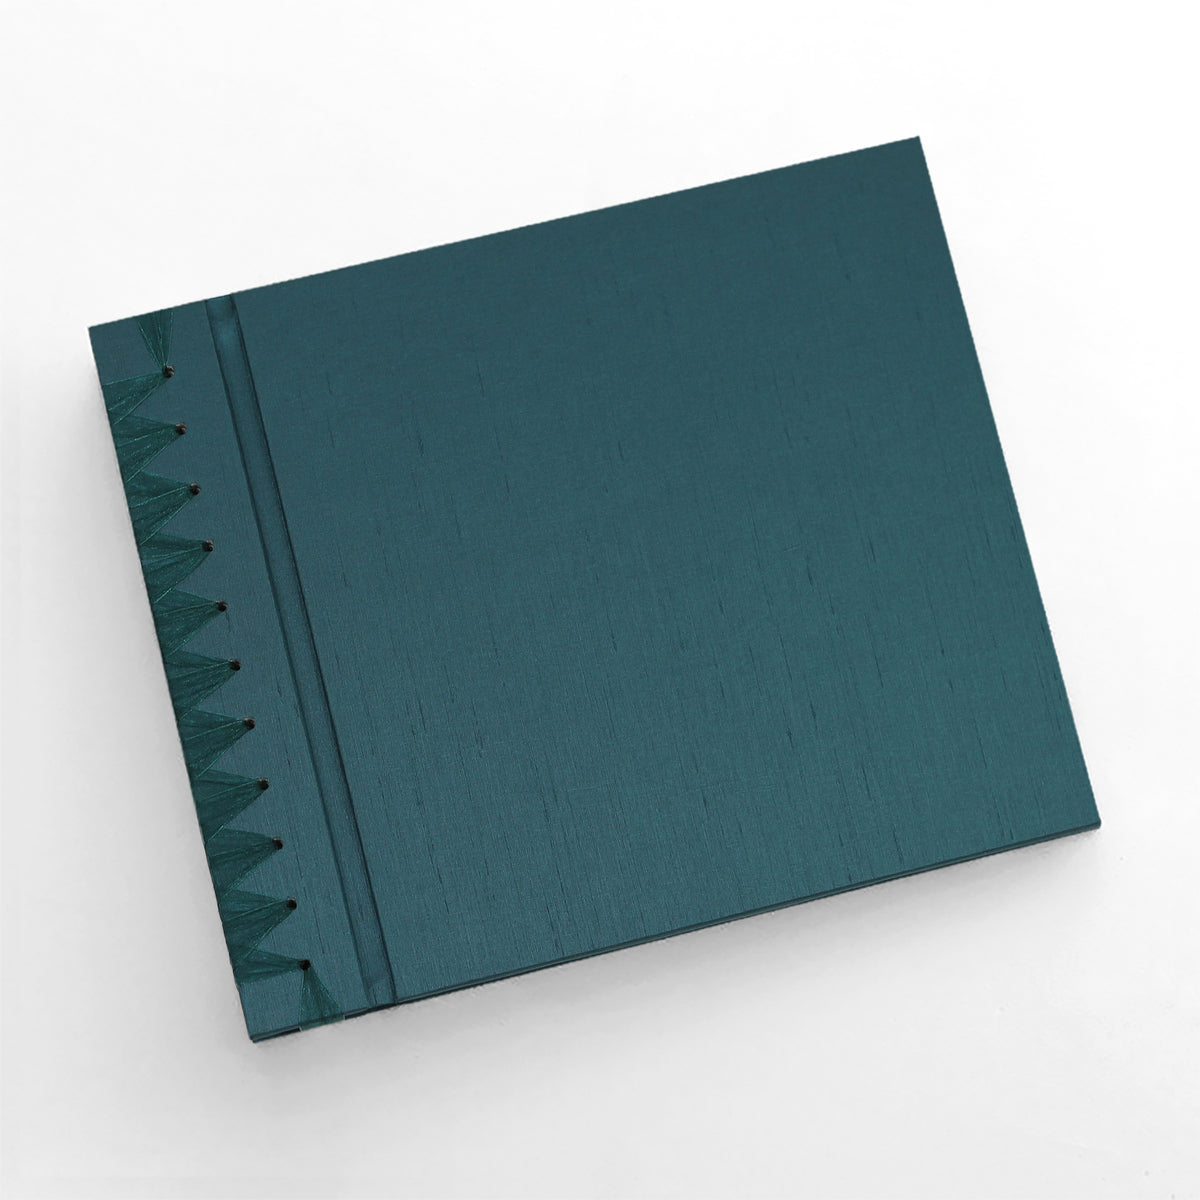 Deluxe 12 x 15 Paper Page Album | Cover: Teal Blue Silk | Available Personalized